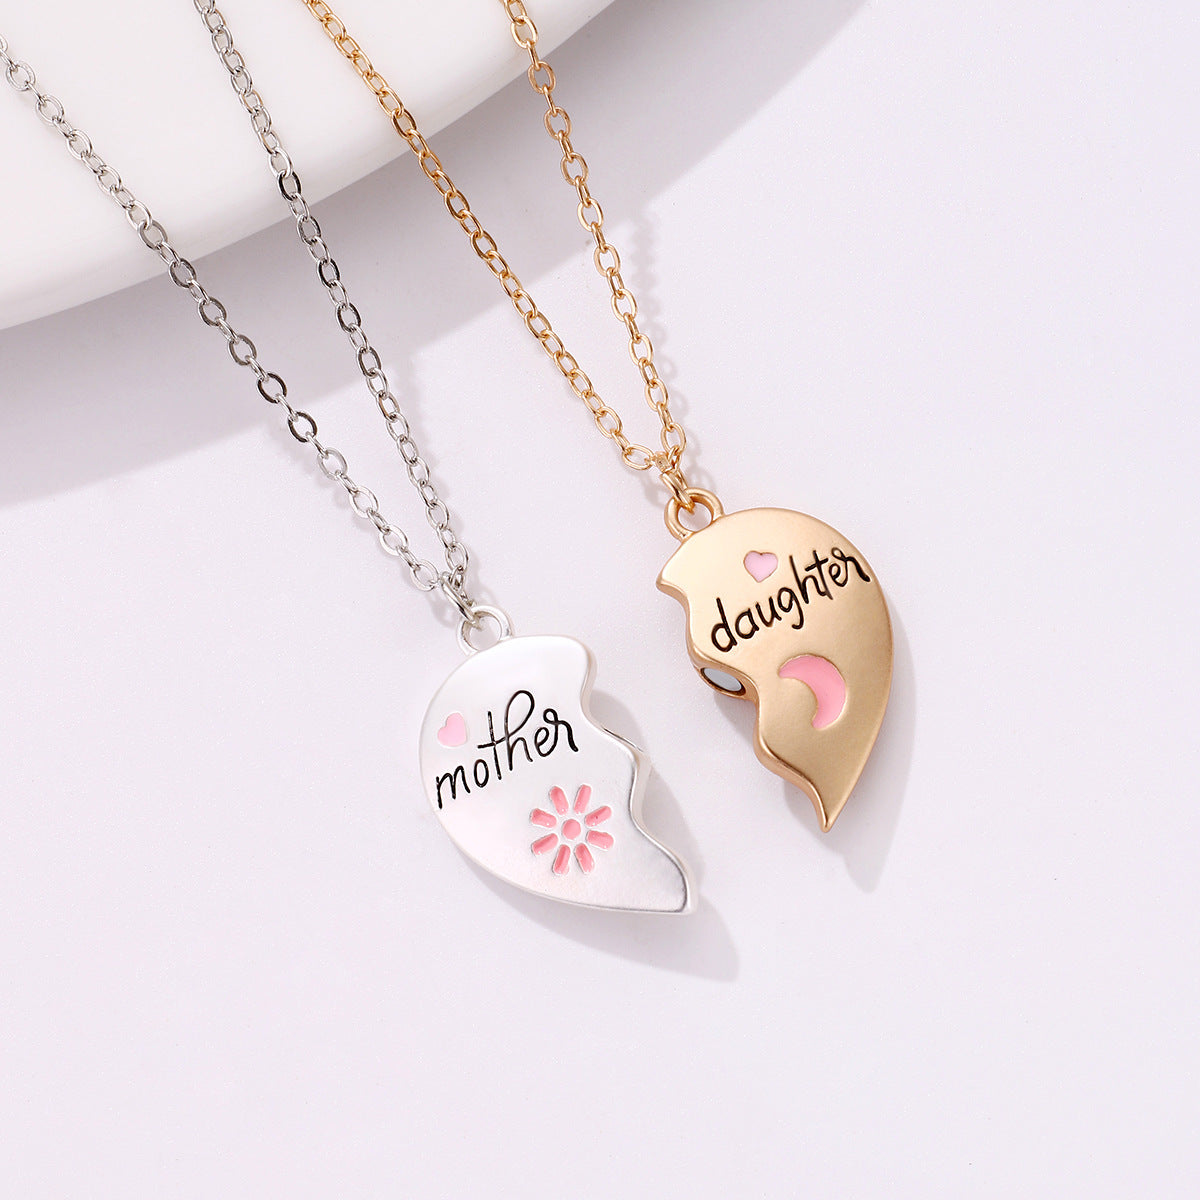 Heartfelt Mother Daughter Or Son Matching Necklace Set ❤️